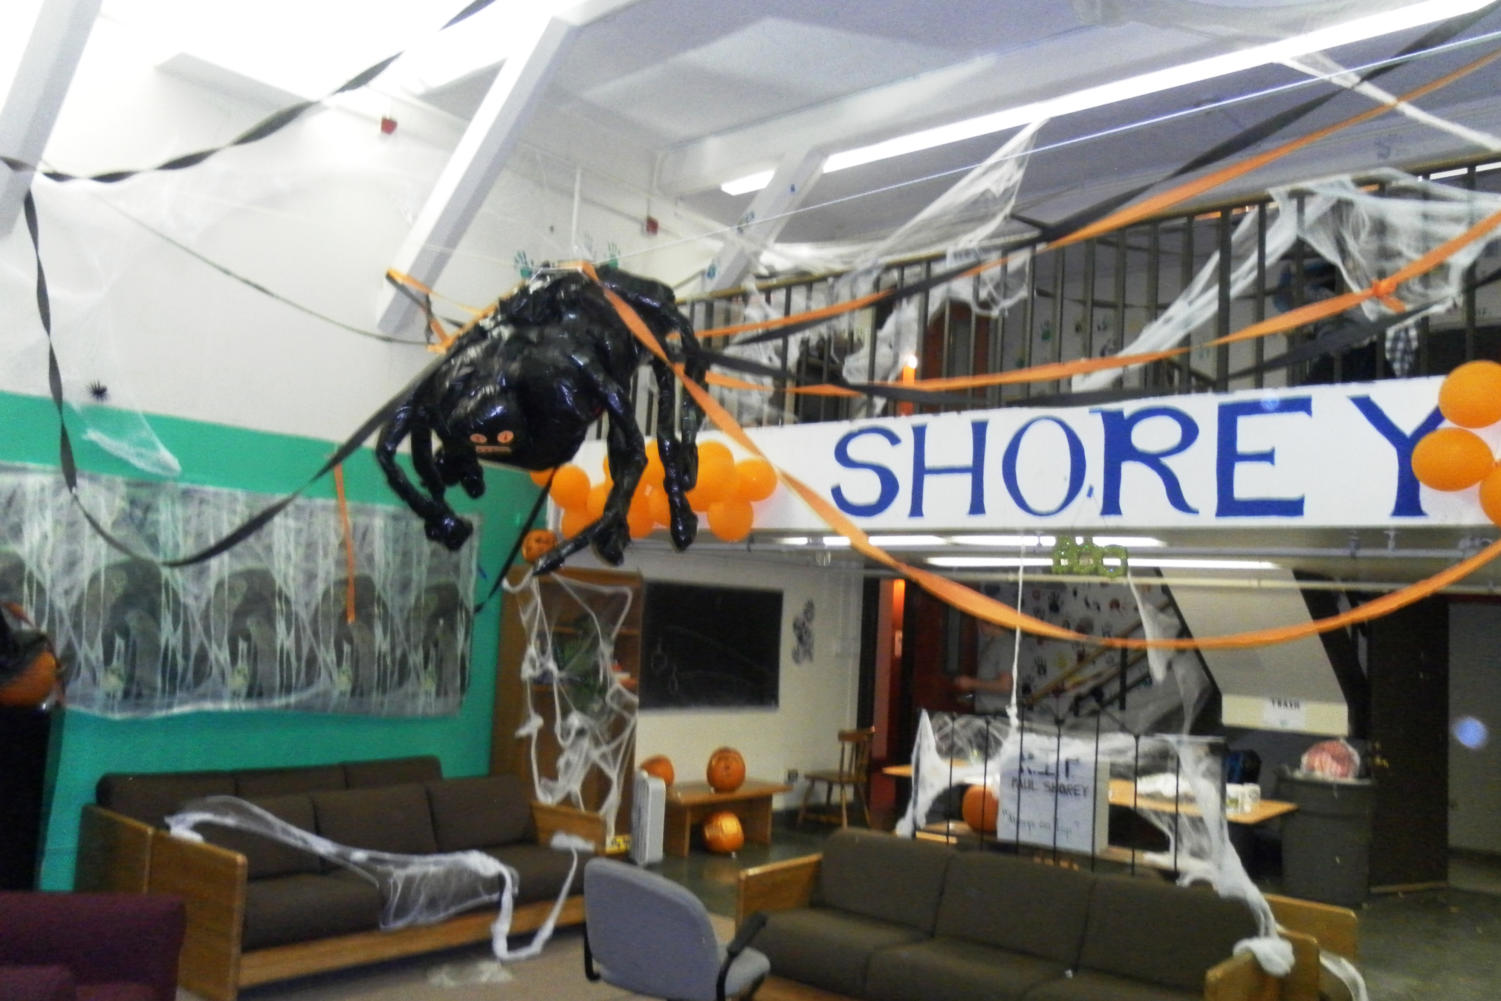 The Shorey Lounge before rennovations took place over spring beak.